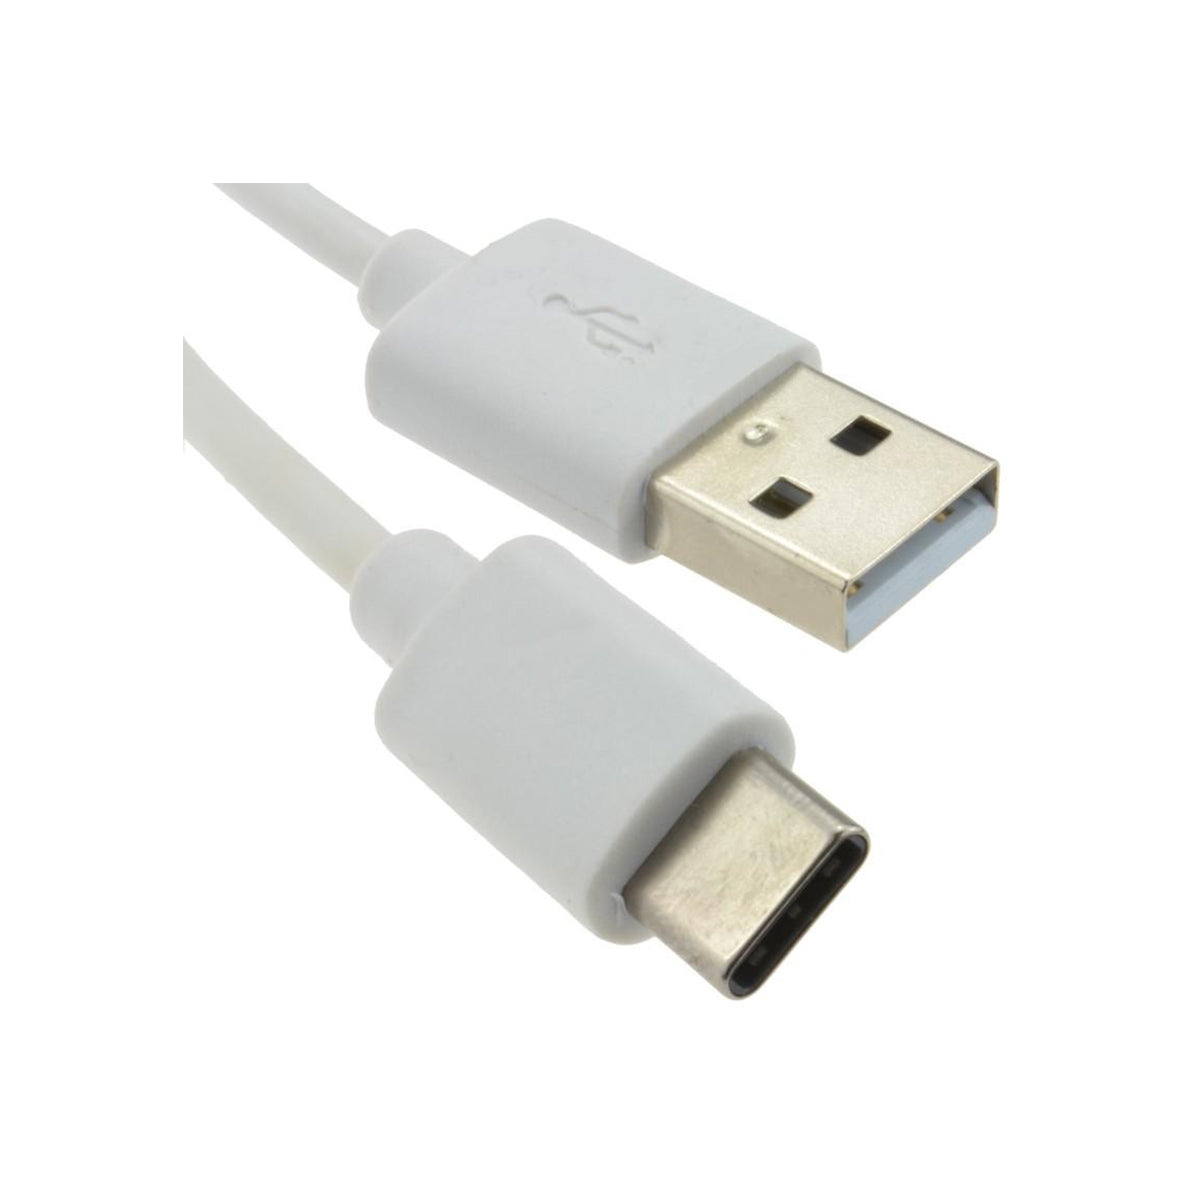 Pro Signal USB 2.0 A Plug to USB Type-C Cable, 0.5m White - Only works with Pure Air 2nd Gen scooters